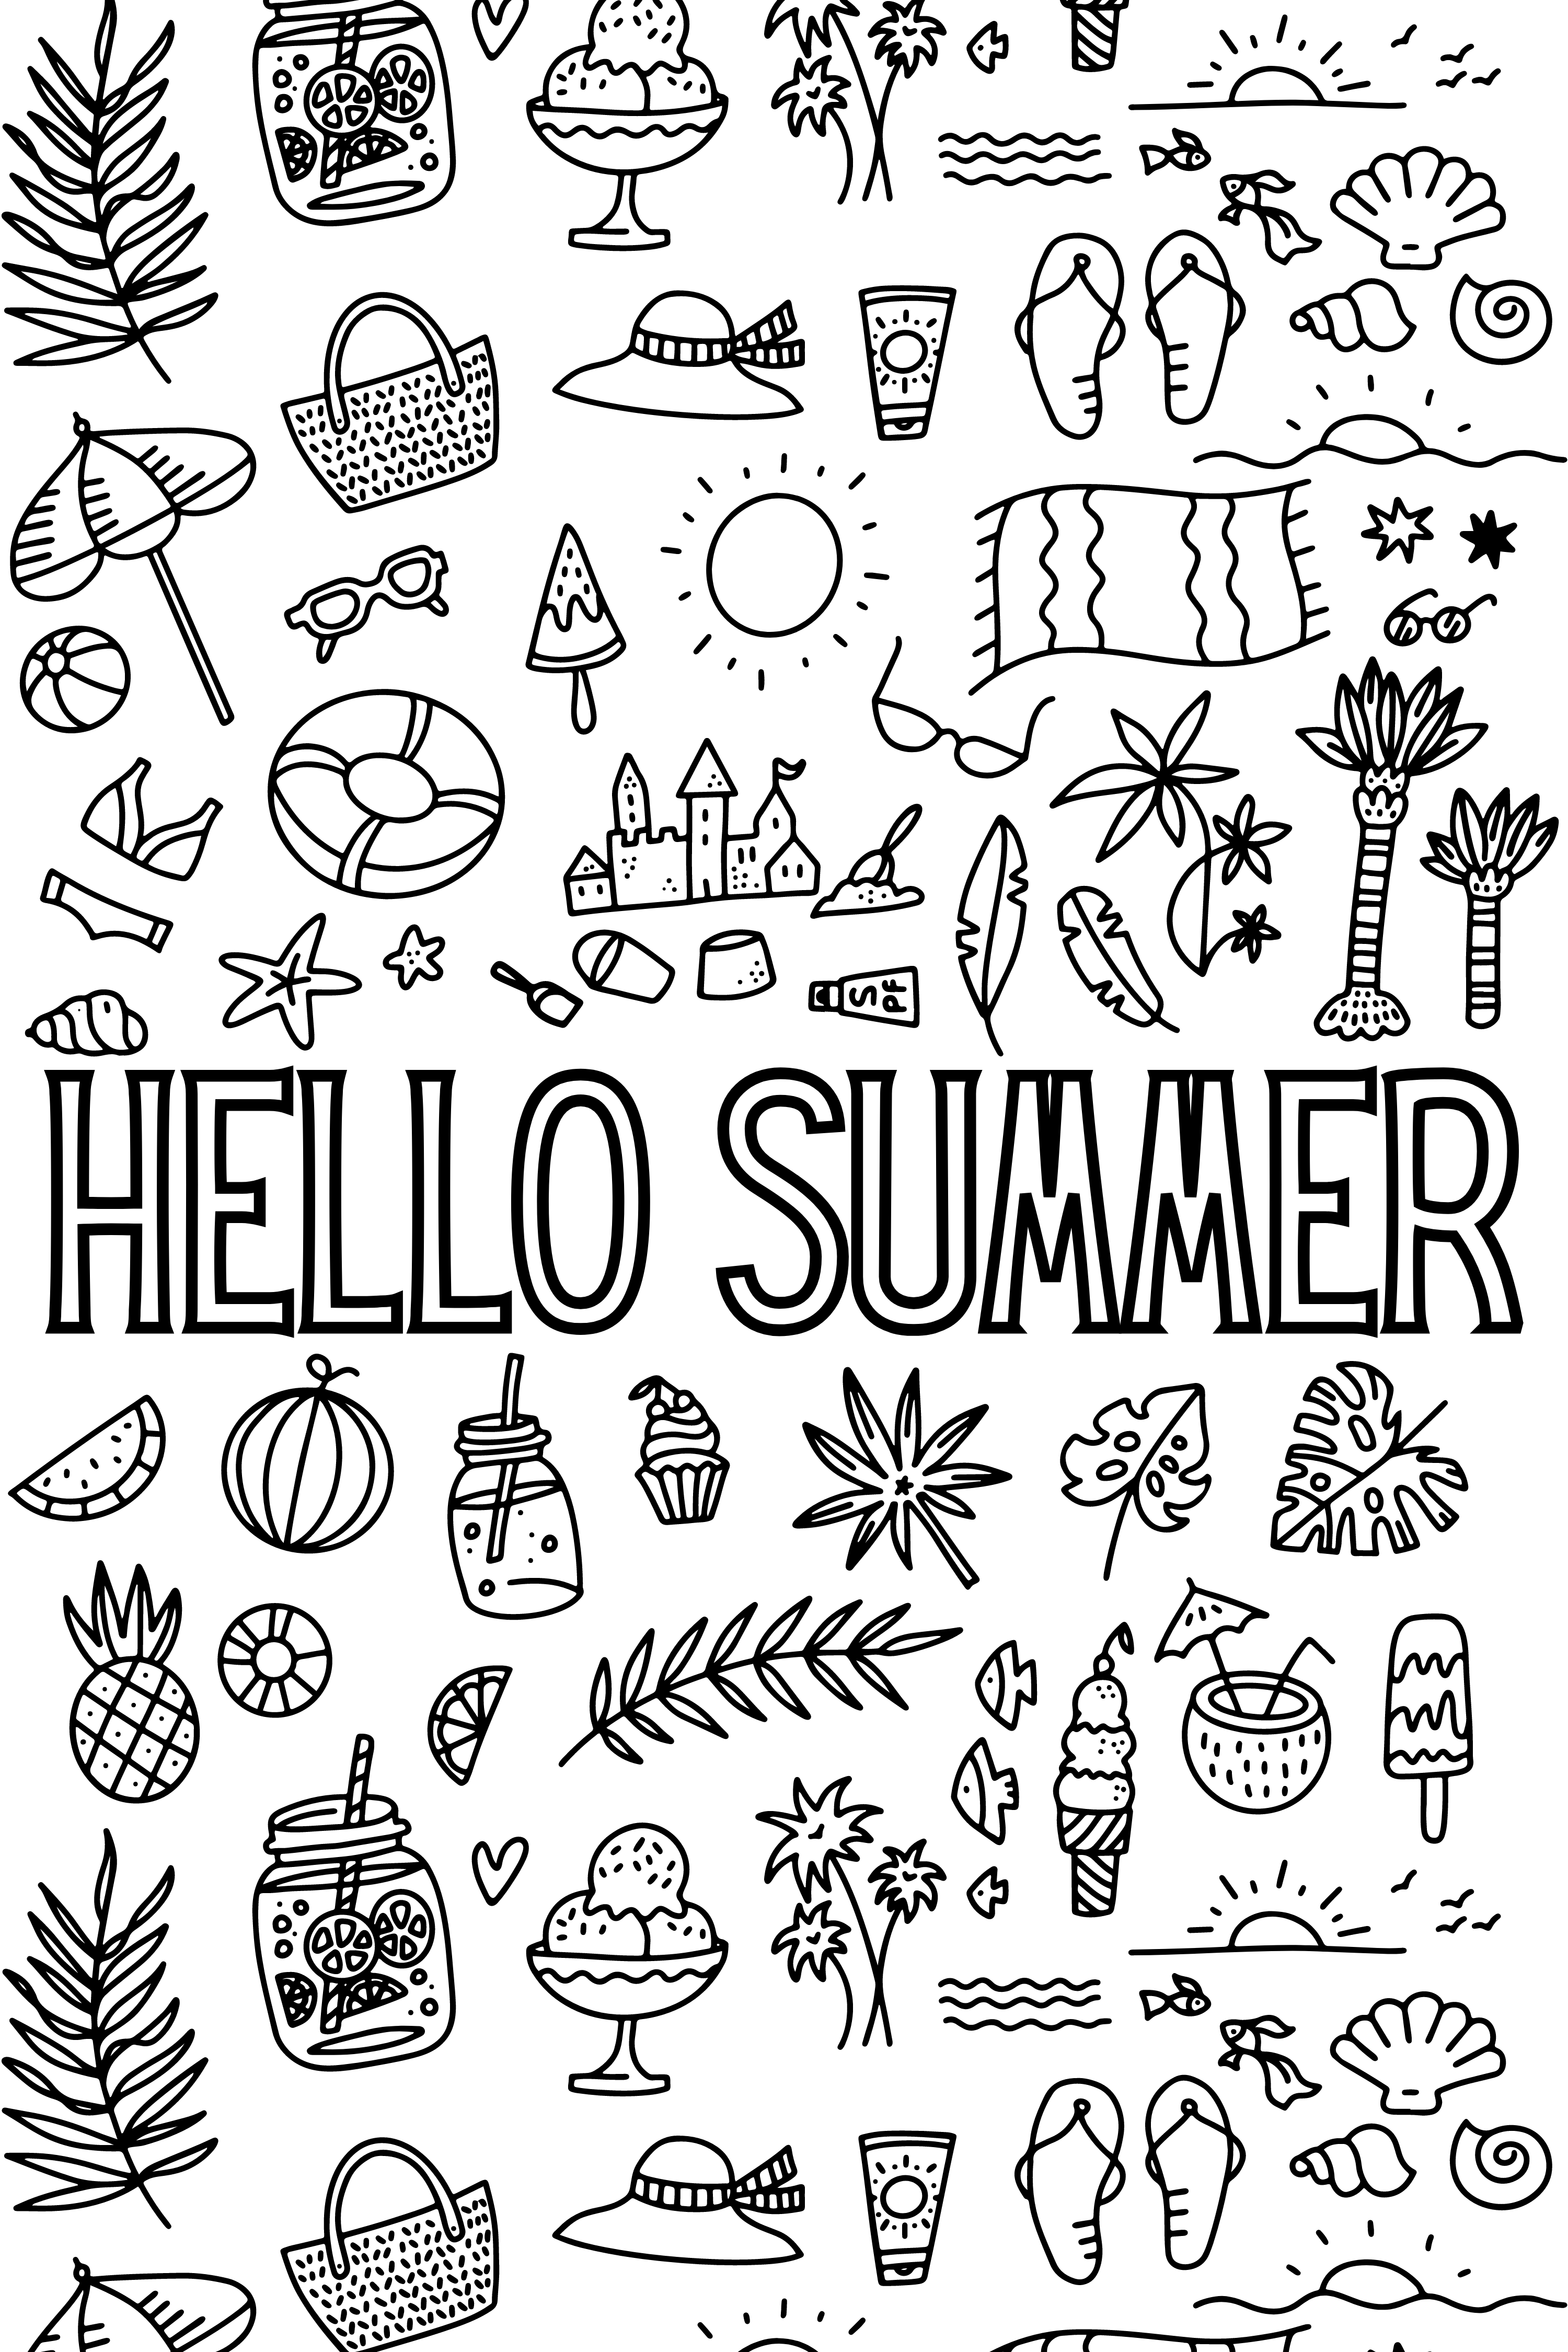 Printable Summer   Hello Summer Coloring Page for kids.